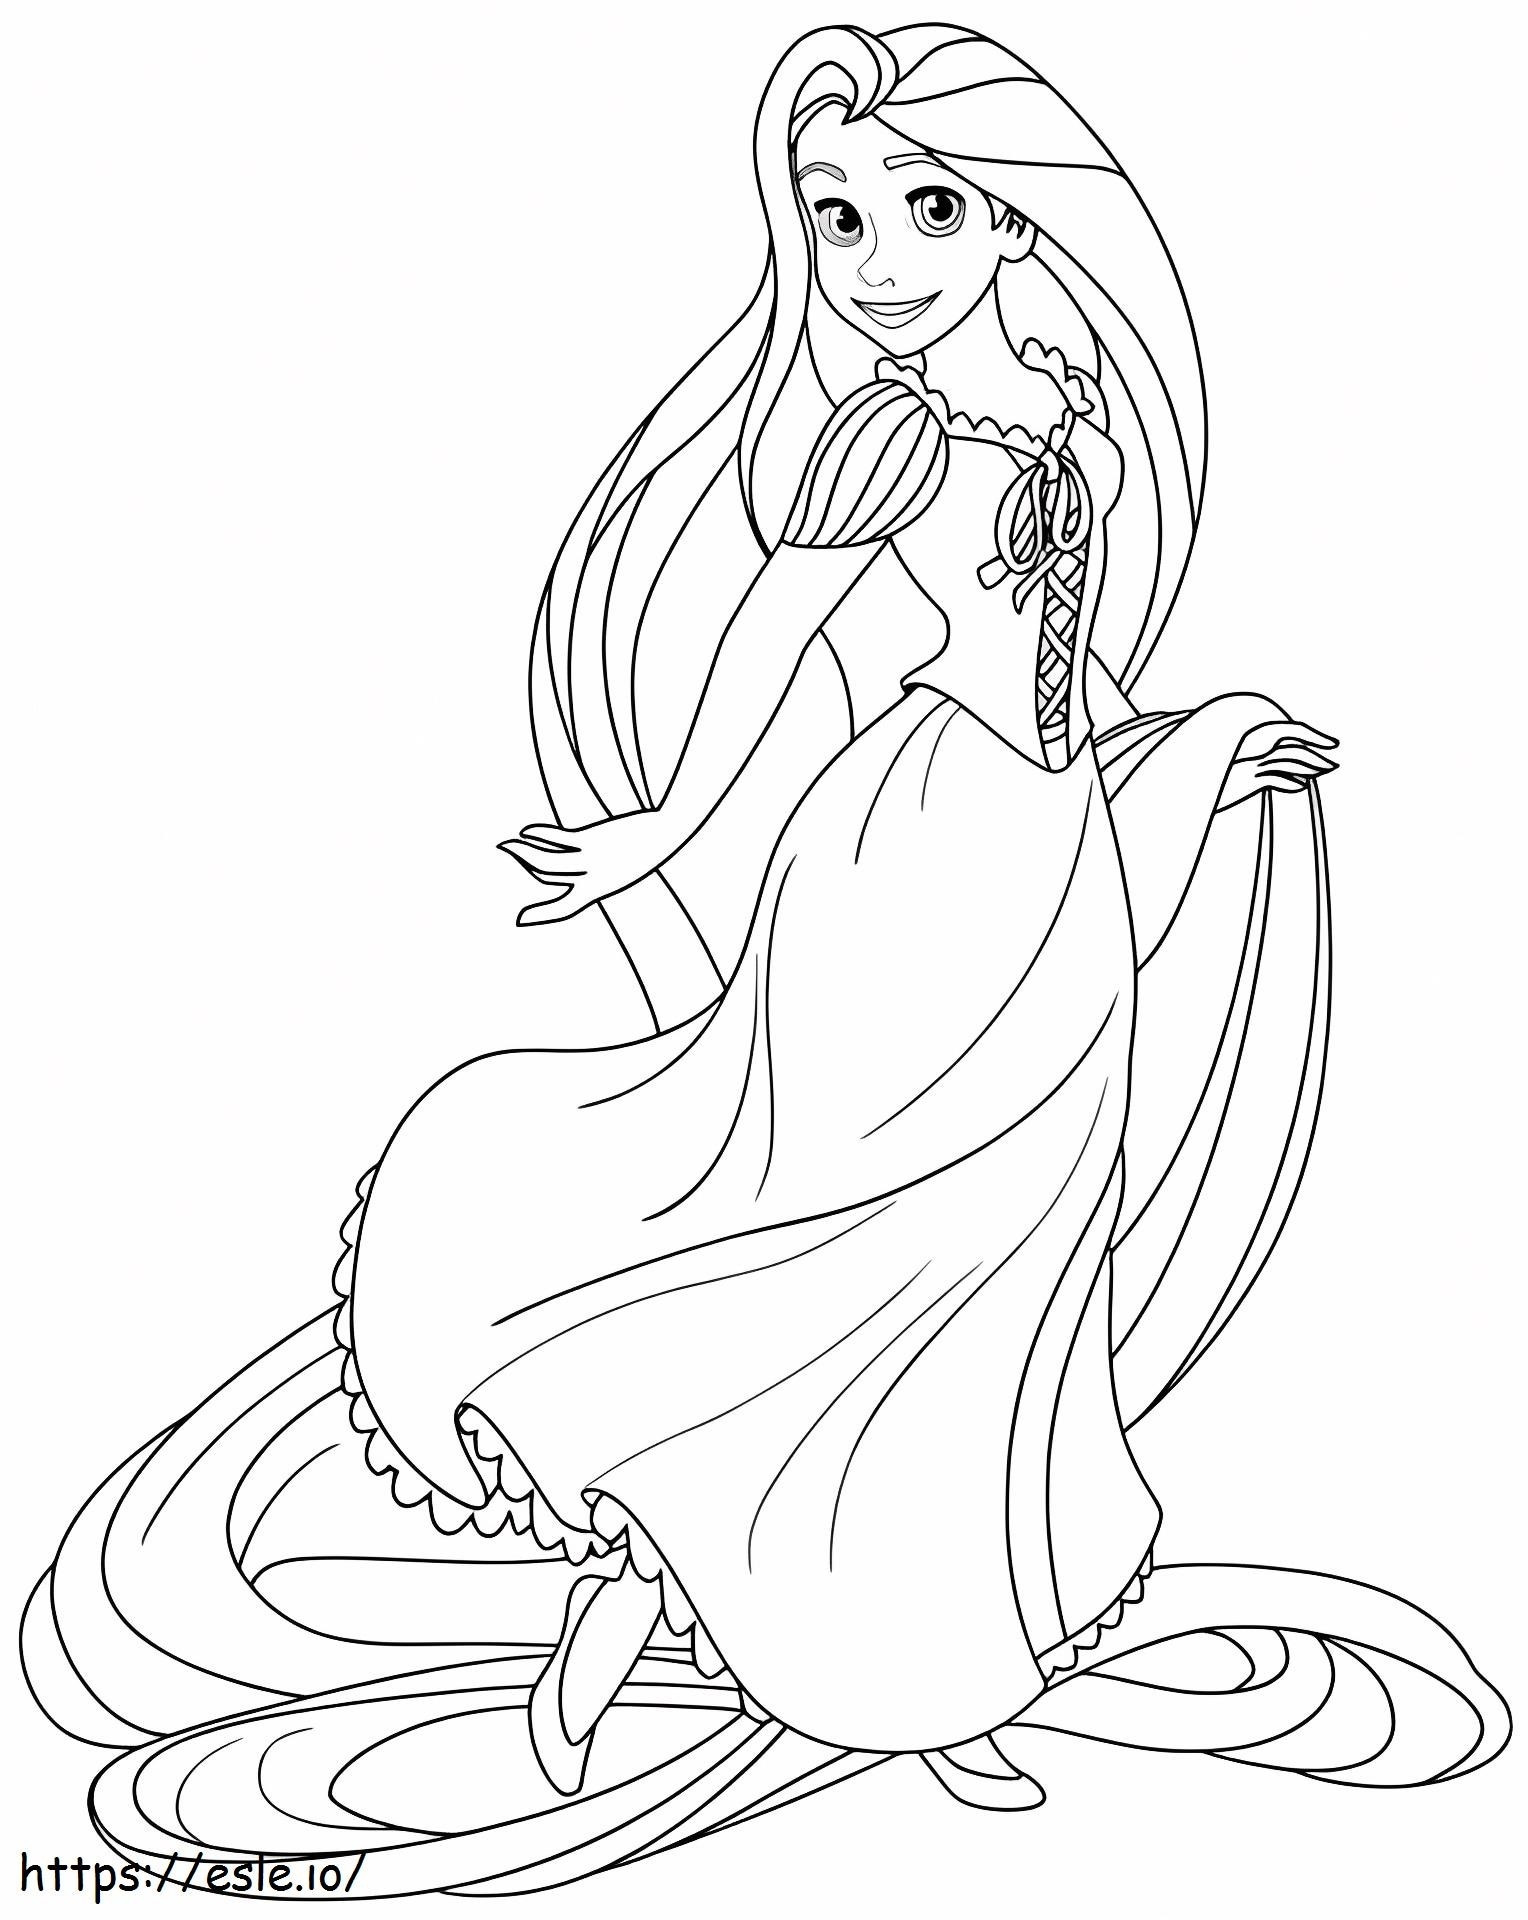 1532943885 Rapunzel From Tangled A4 coloring page